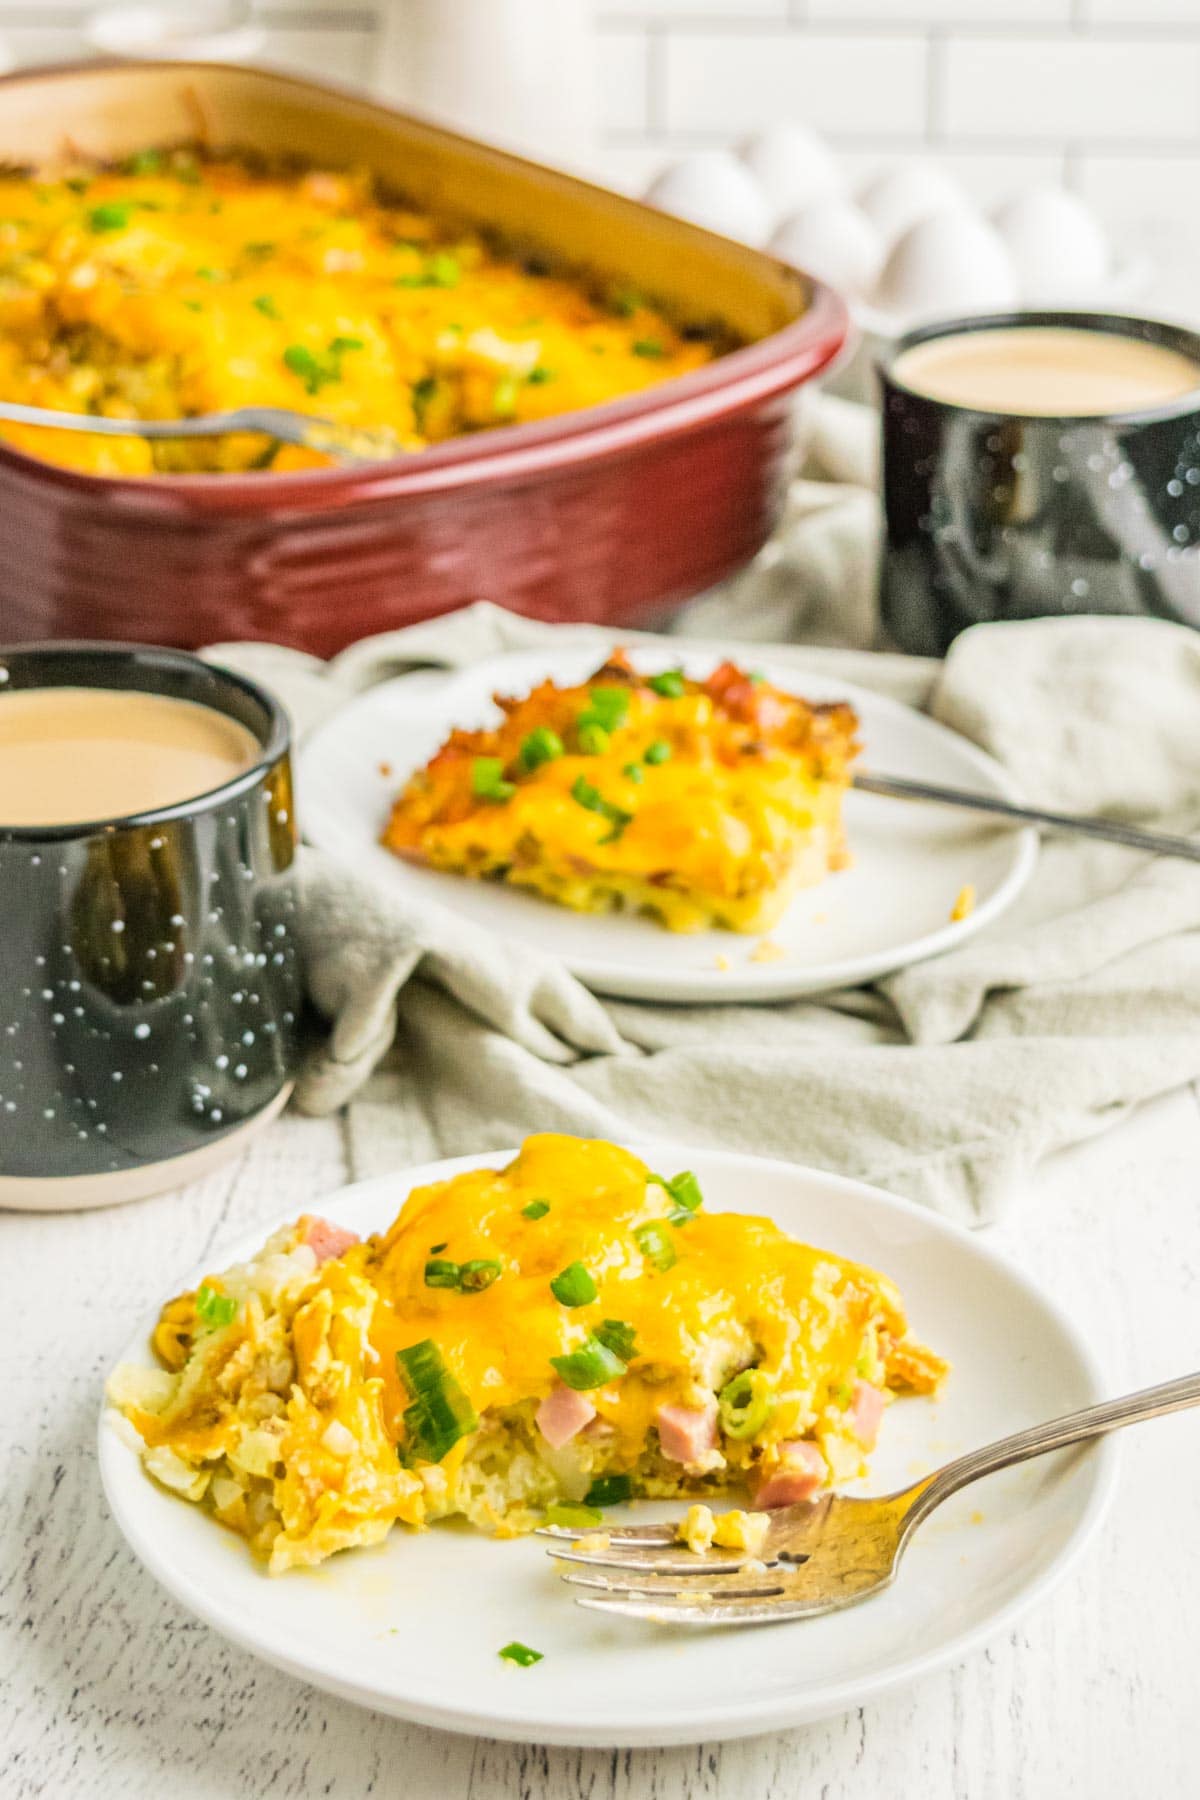 Sausage, egg, hashbrown casserole portions